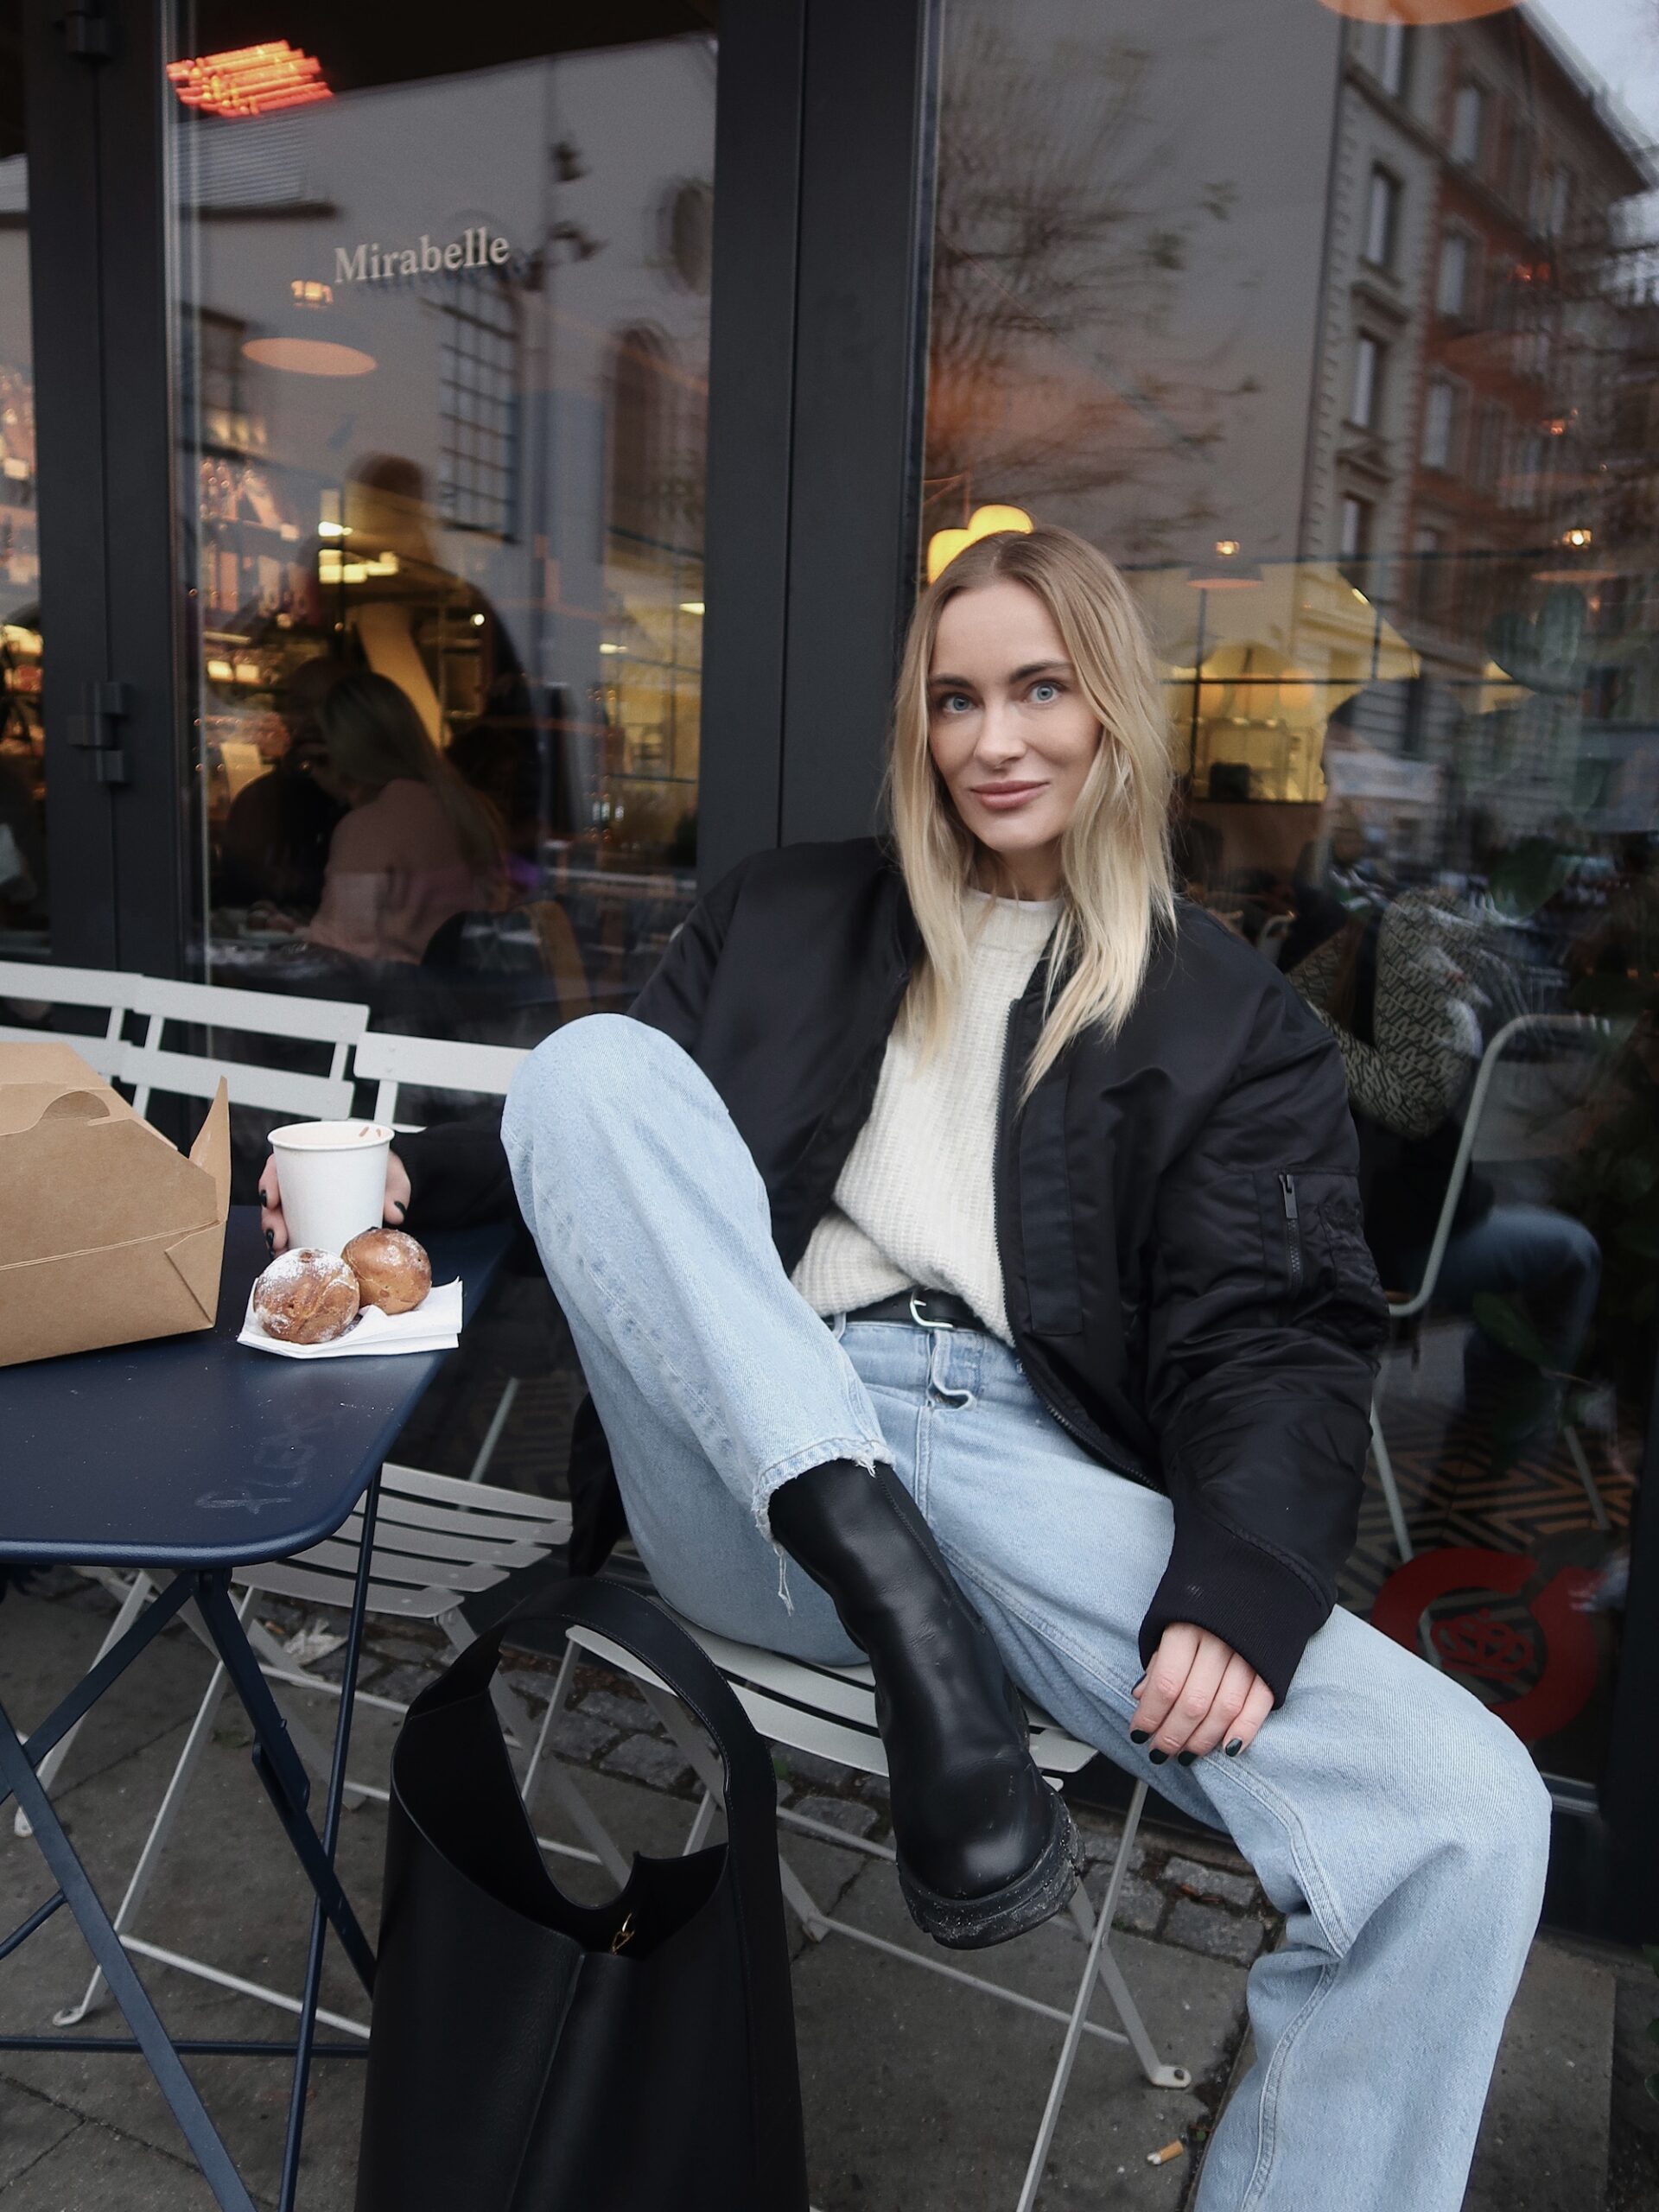 Marie Hindkaer sitting in his casual Look with CPH500 vitello black and CPH Bag 1 vitello black at Mirabelle Cafe in Copenhagen and eating some Danish Aebleskiver pancake balls. 